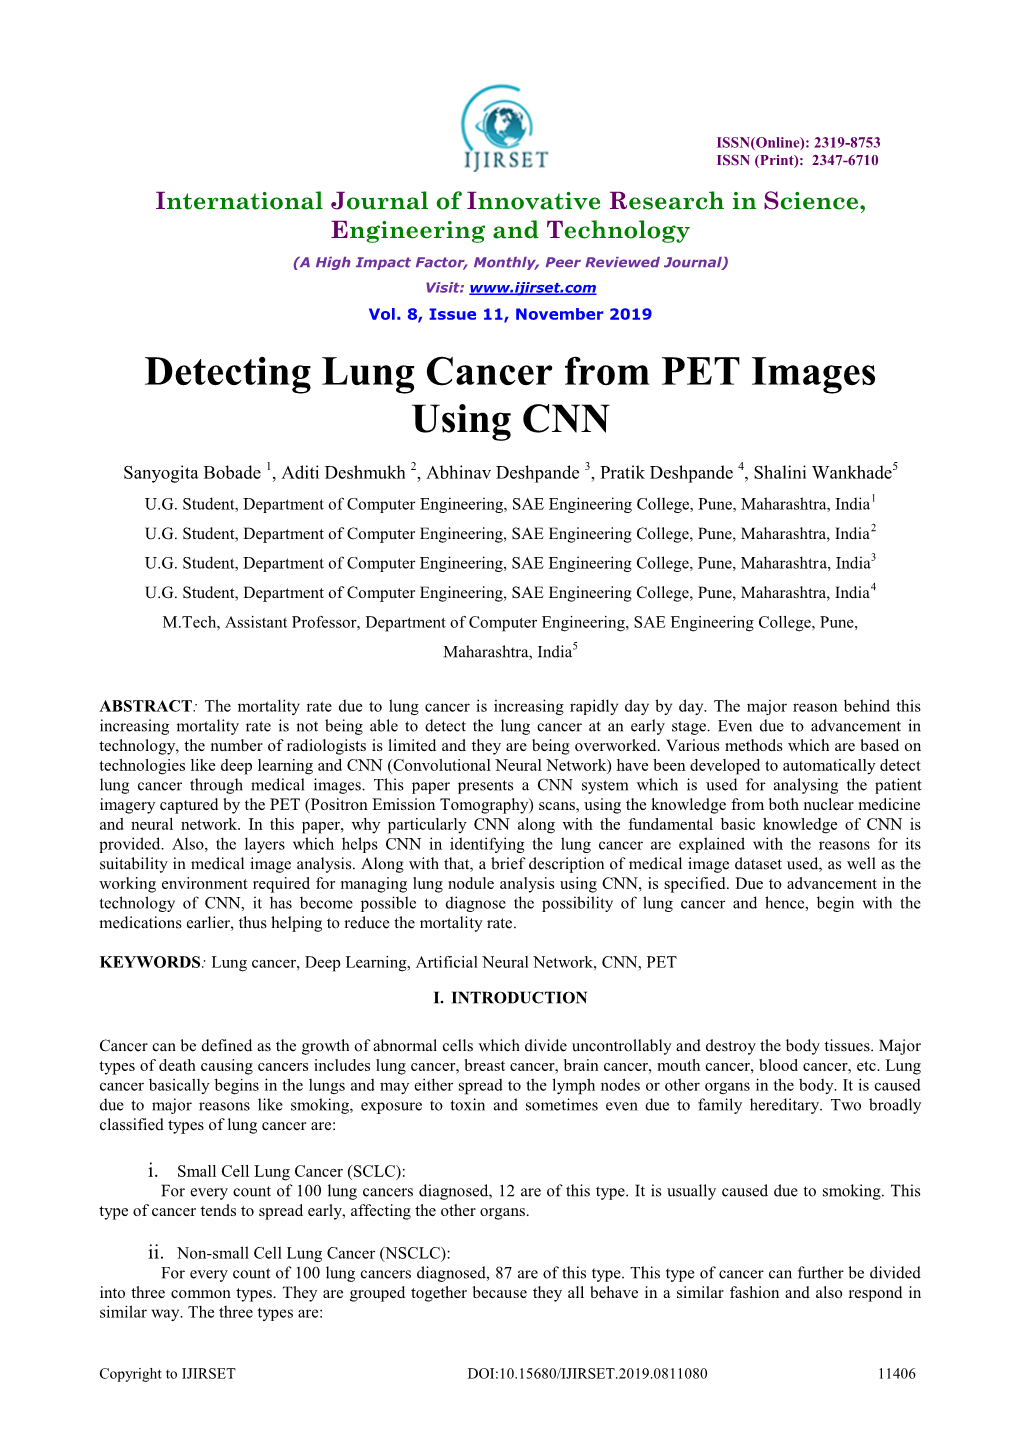 Detecting Lung Cancer from PET Images Using CNN